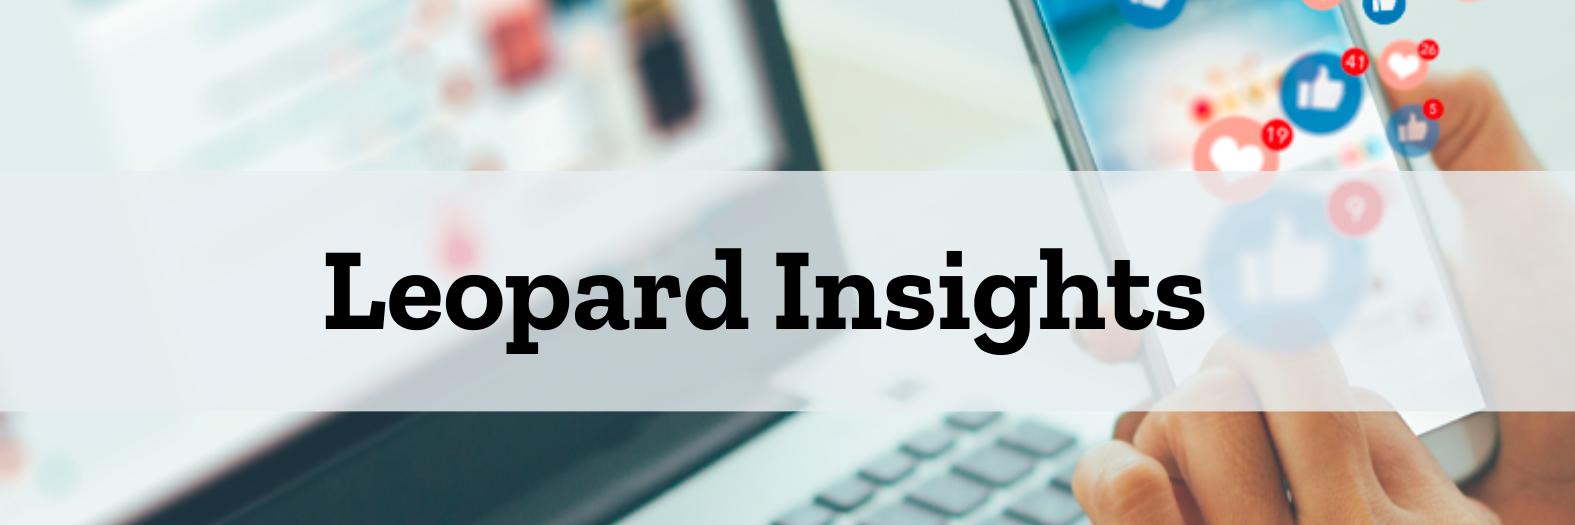 Insights from Leopard Solutions based on our data analysis and market trends.